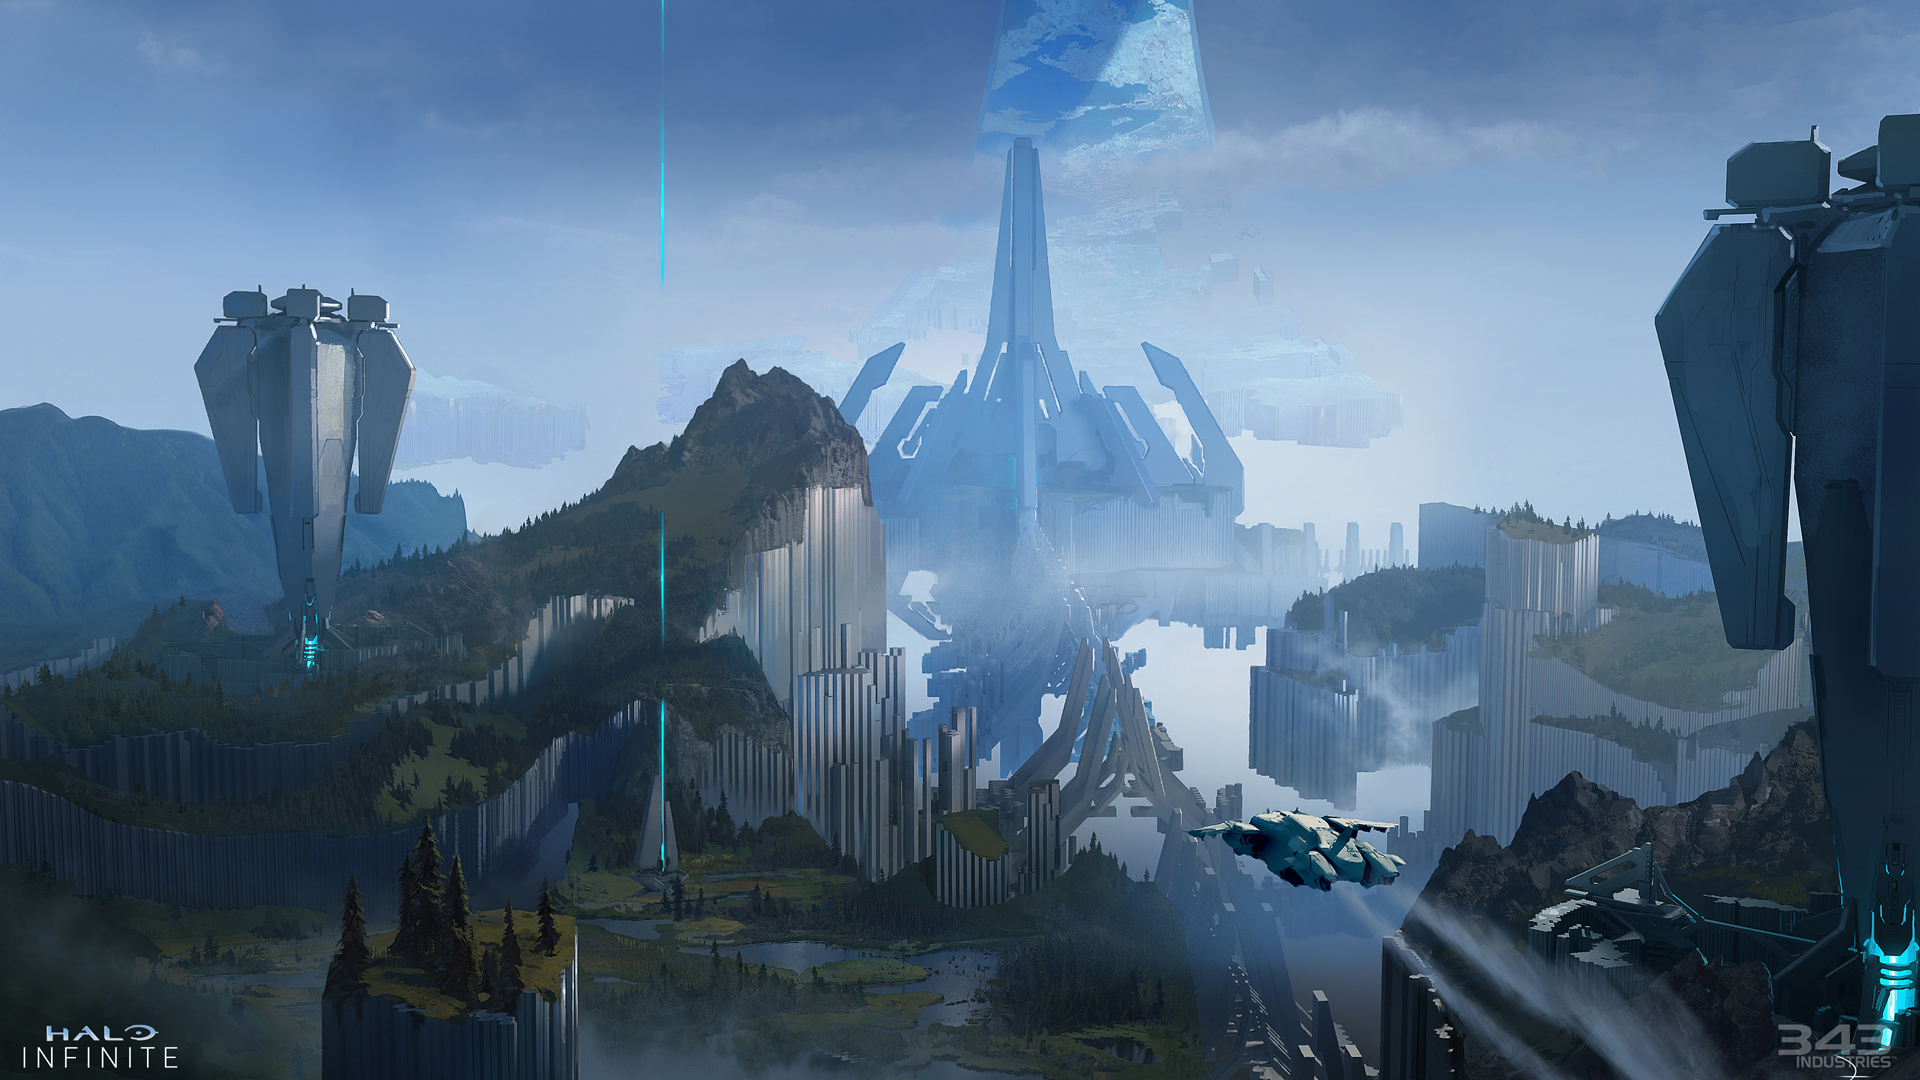 Concept art from The Art of Halo Infinite book